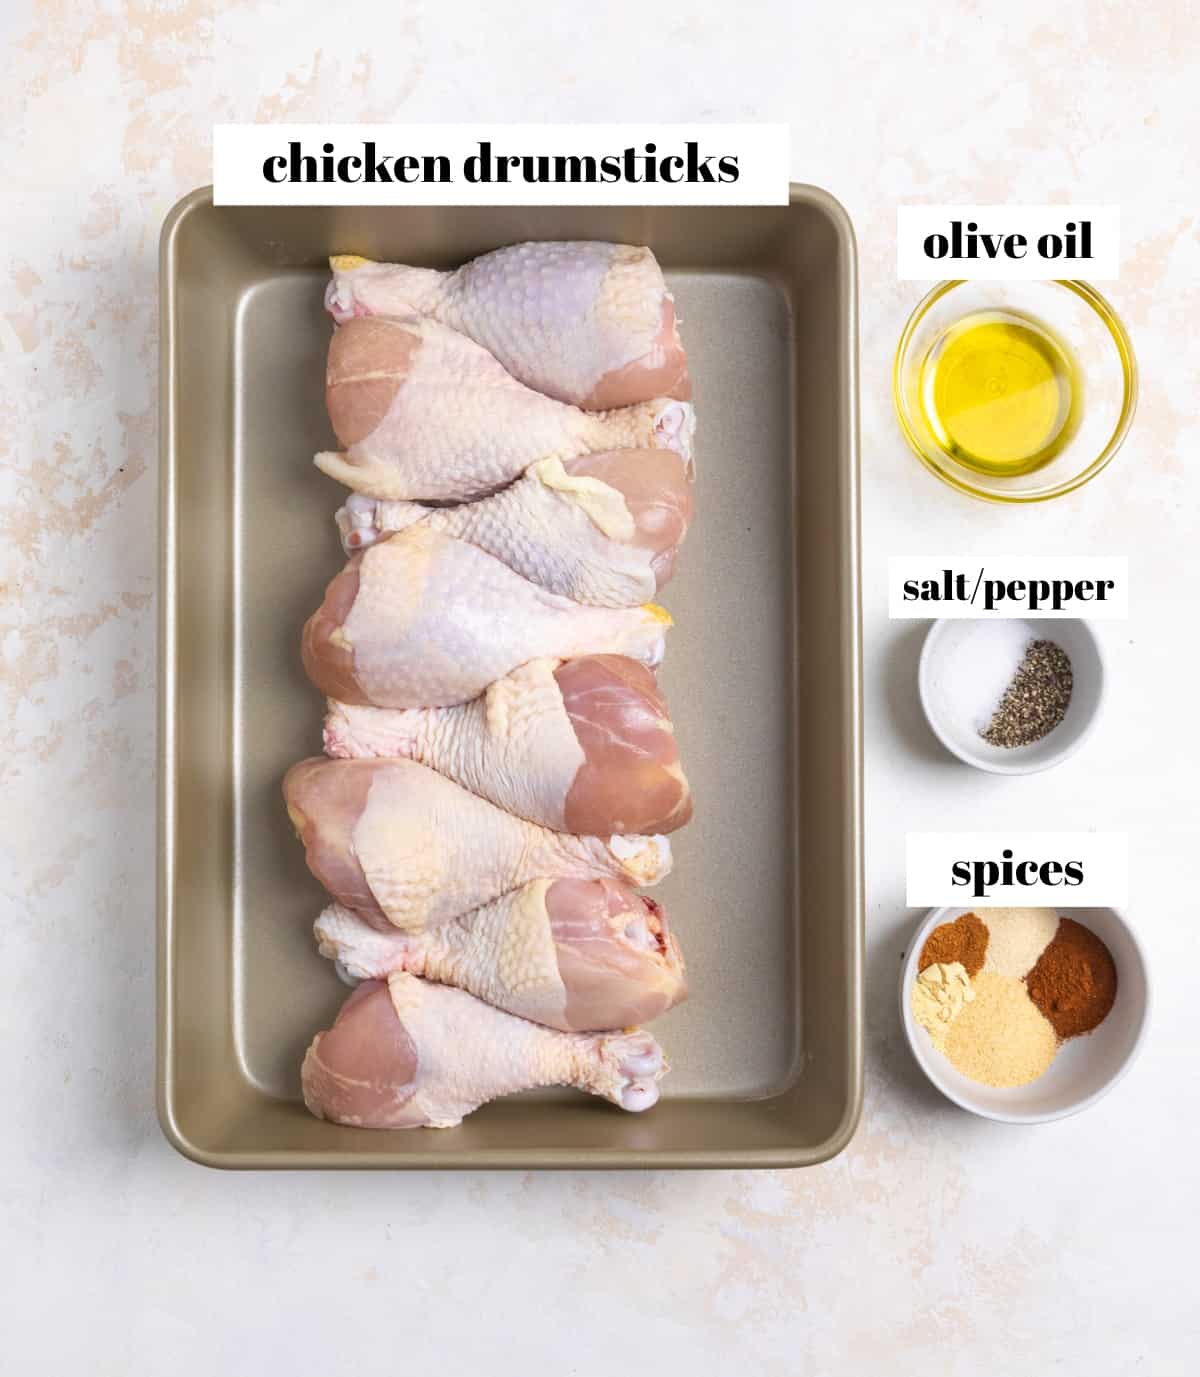 Chicken drumsticks, olive oil, and spices labeled on counter.